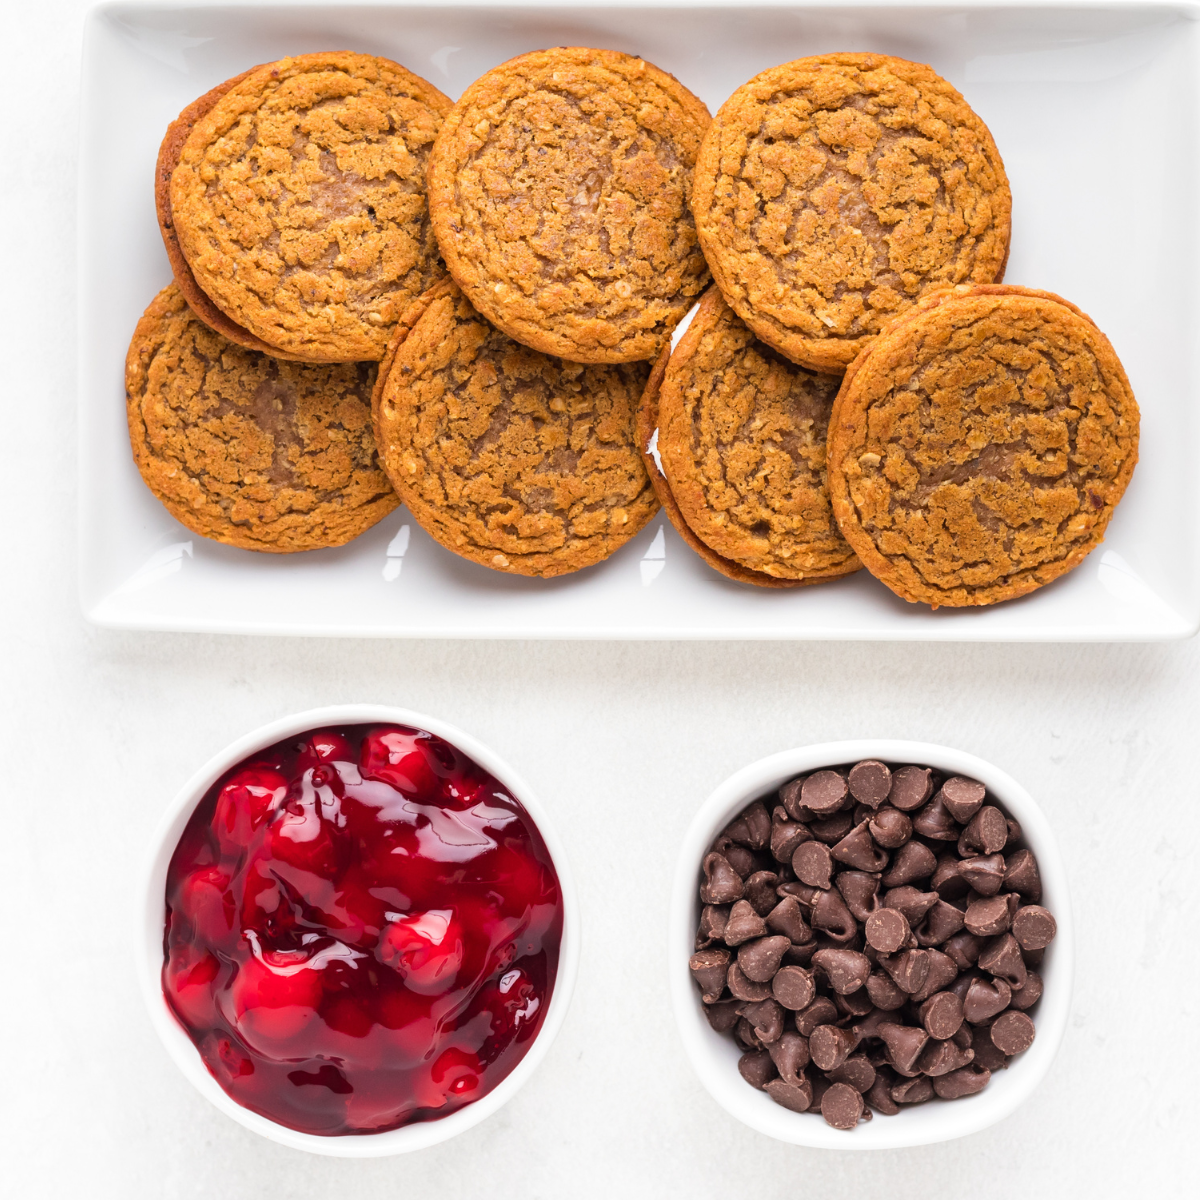 Ingredients Needed For Air Fryer Cherry Oatmeal Pies